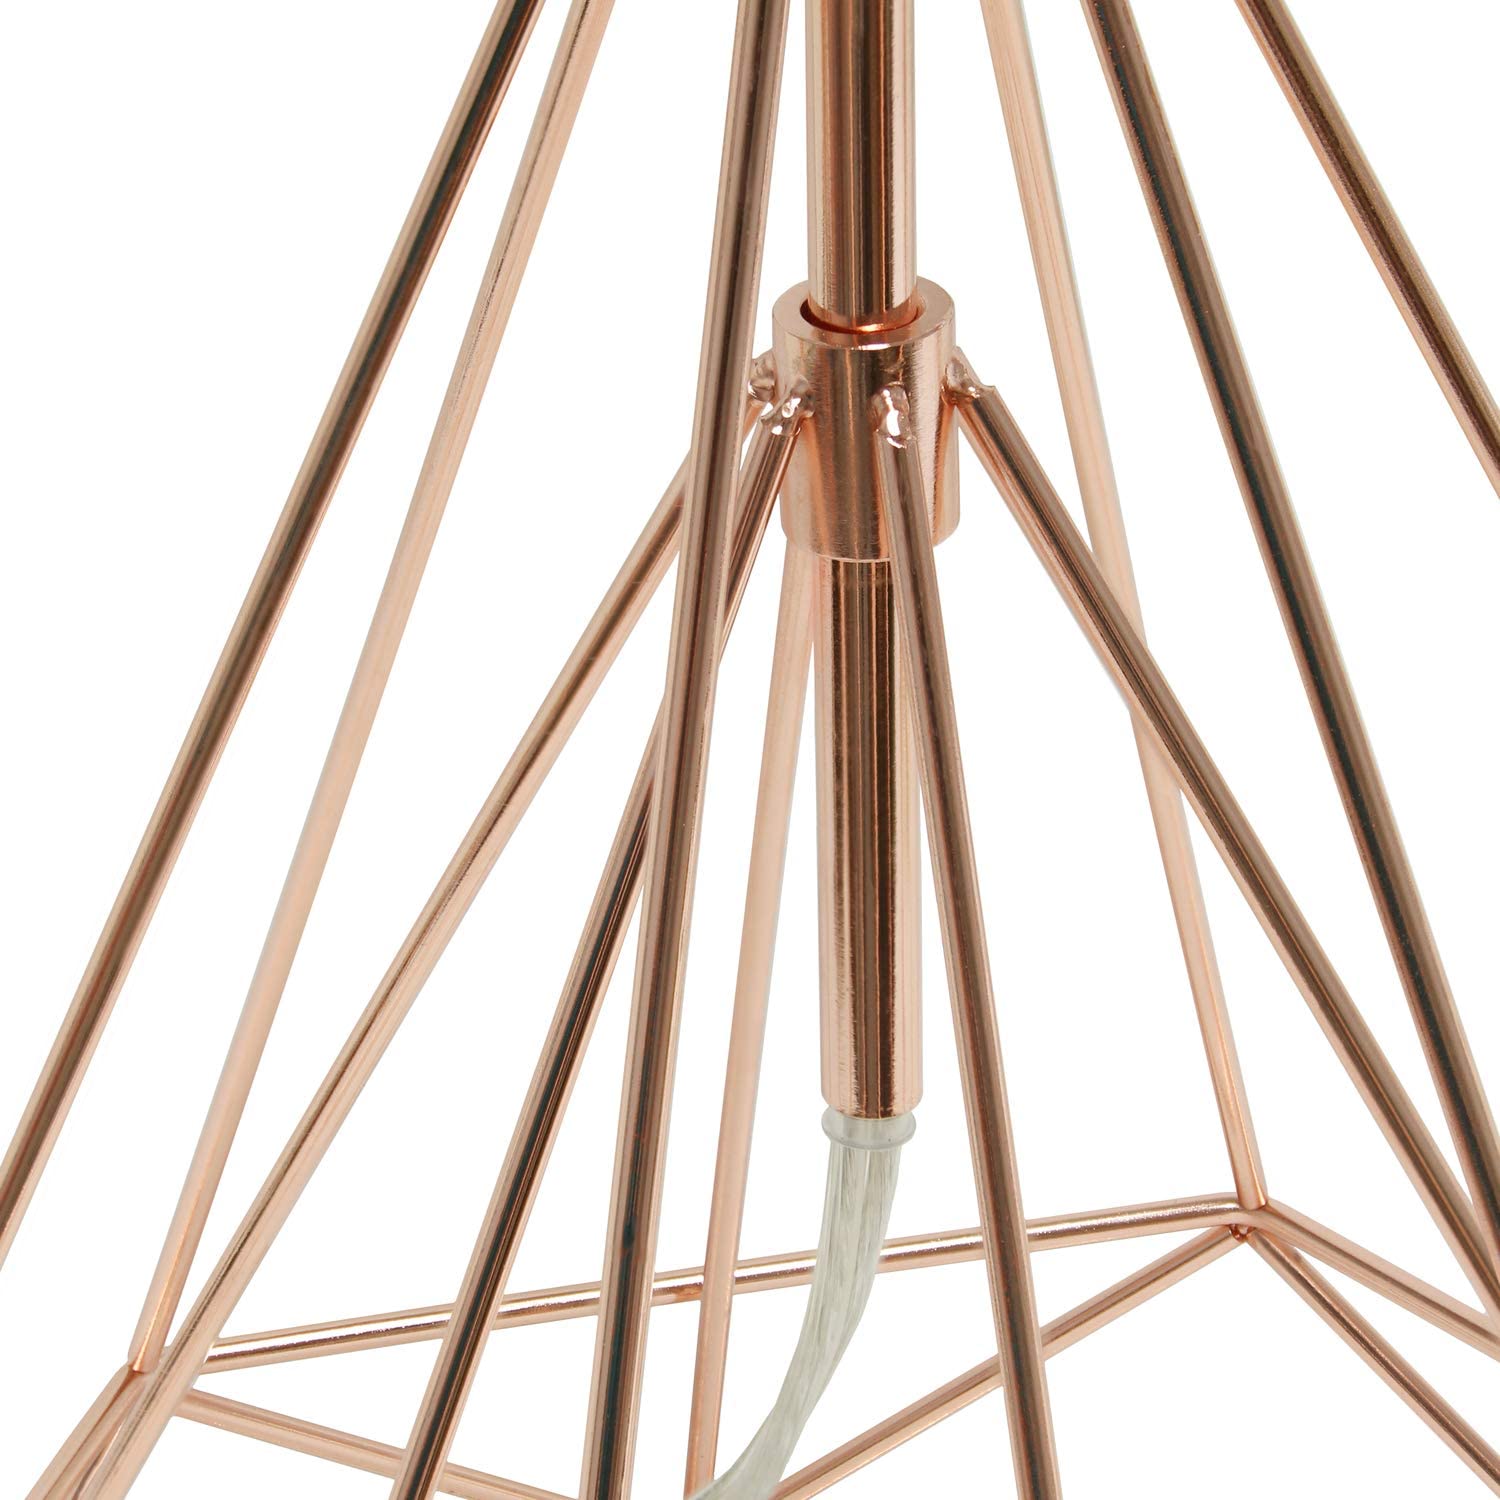 Lalia Home Decorative Table Lamp with Geometric Rose Gold Wired Base and White Fabric Tapered Shade